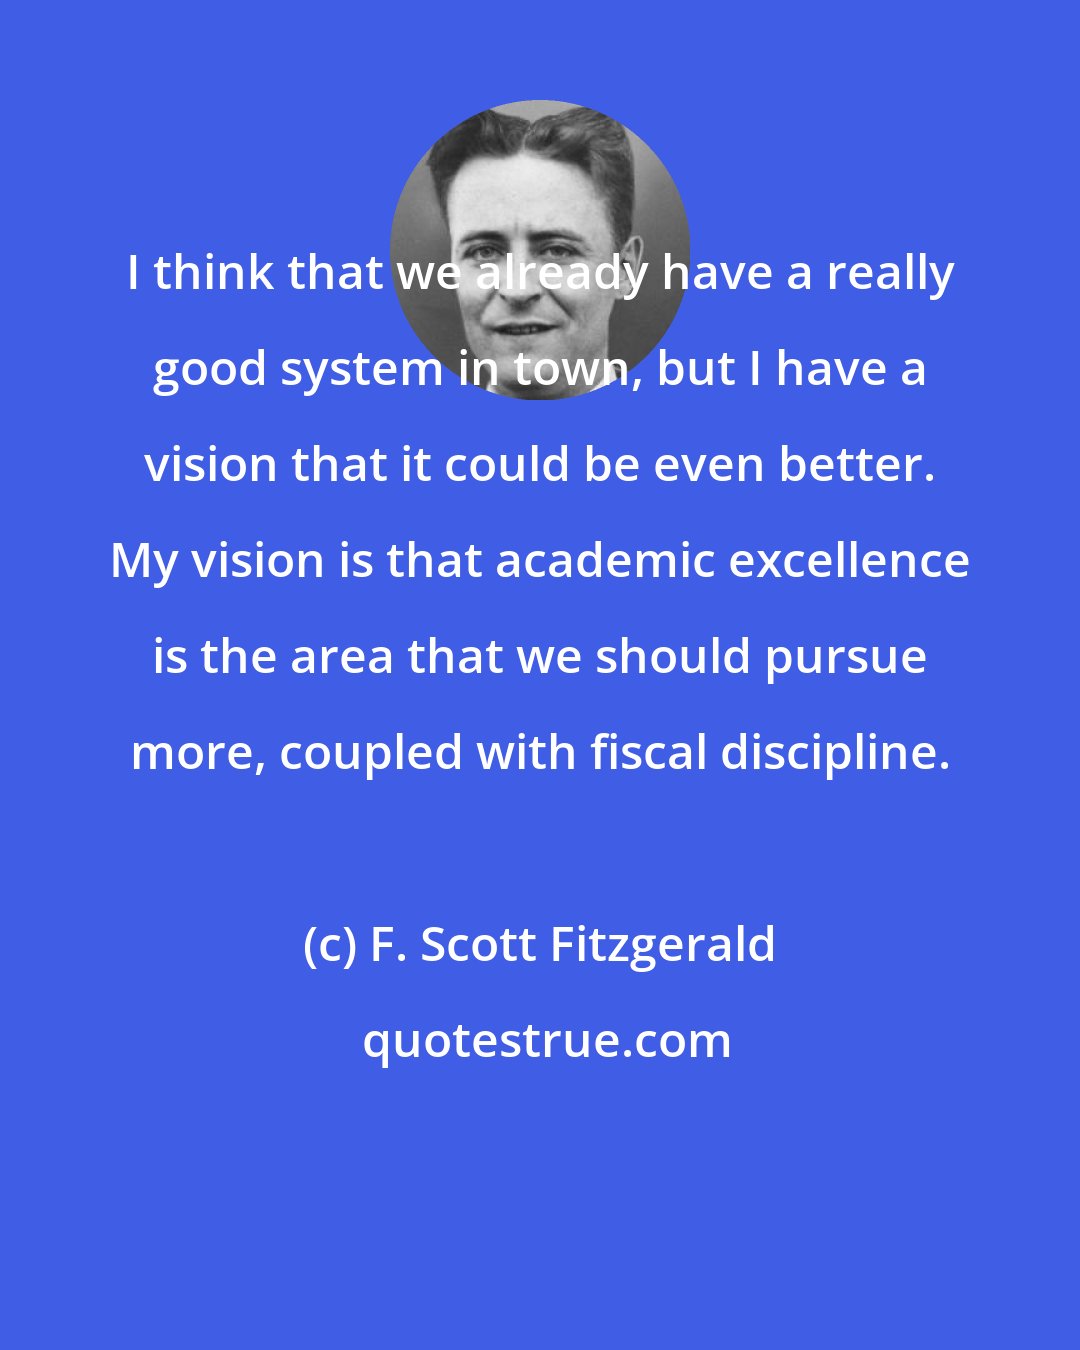 F. Scott Fitzgerald: I think that we already have a really good system in town, but I have a vision that it could be even better. My vision is that academic excellence is the area that we should pursue more, coupled with fiscal discipline.